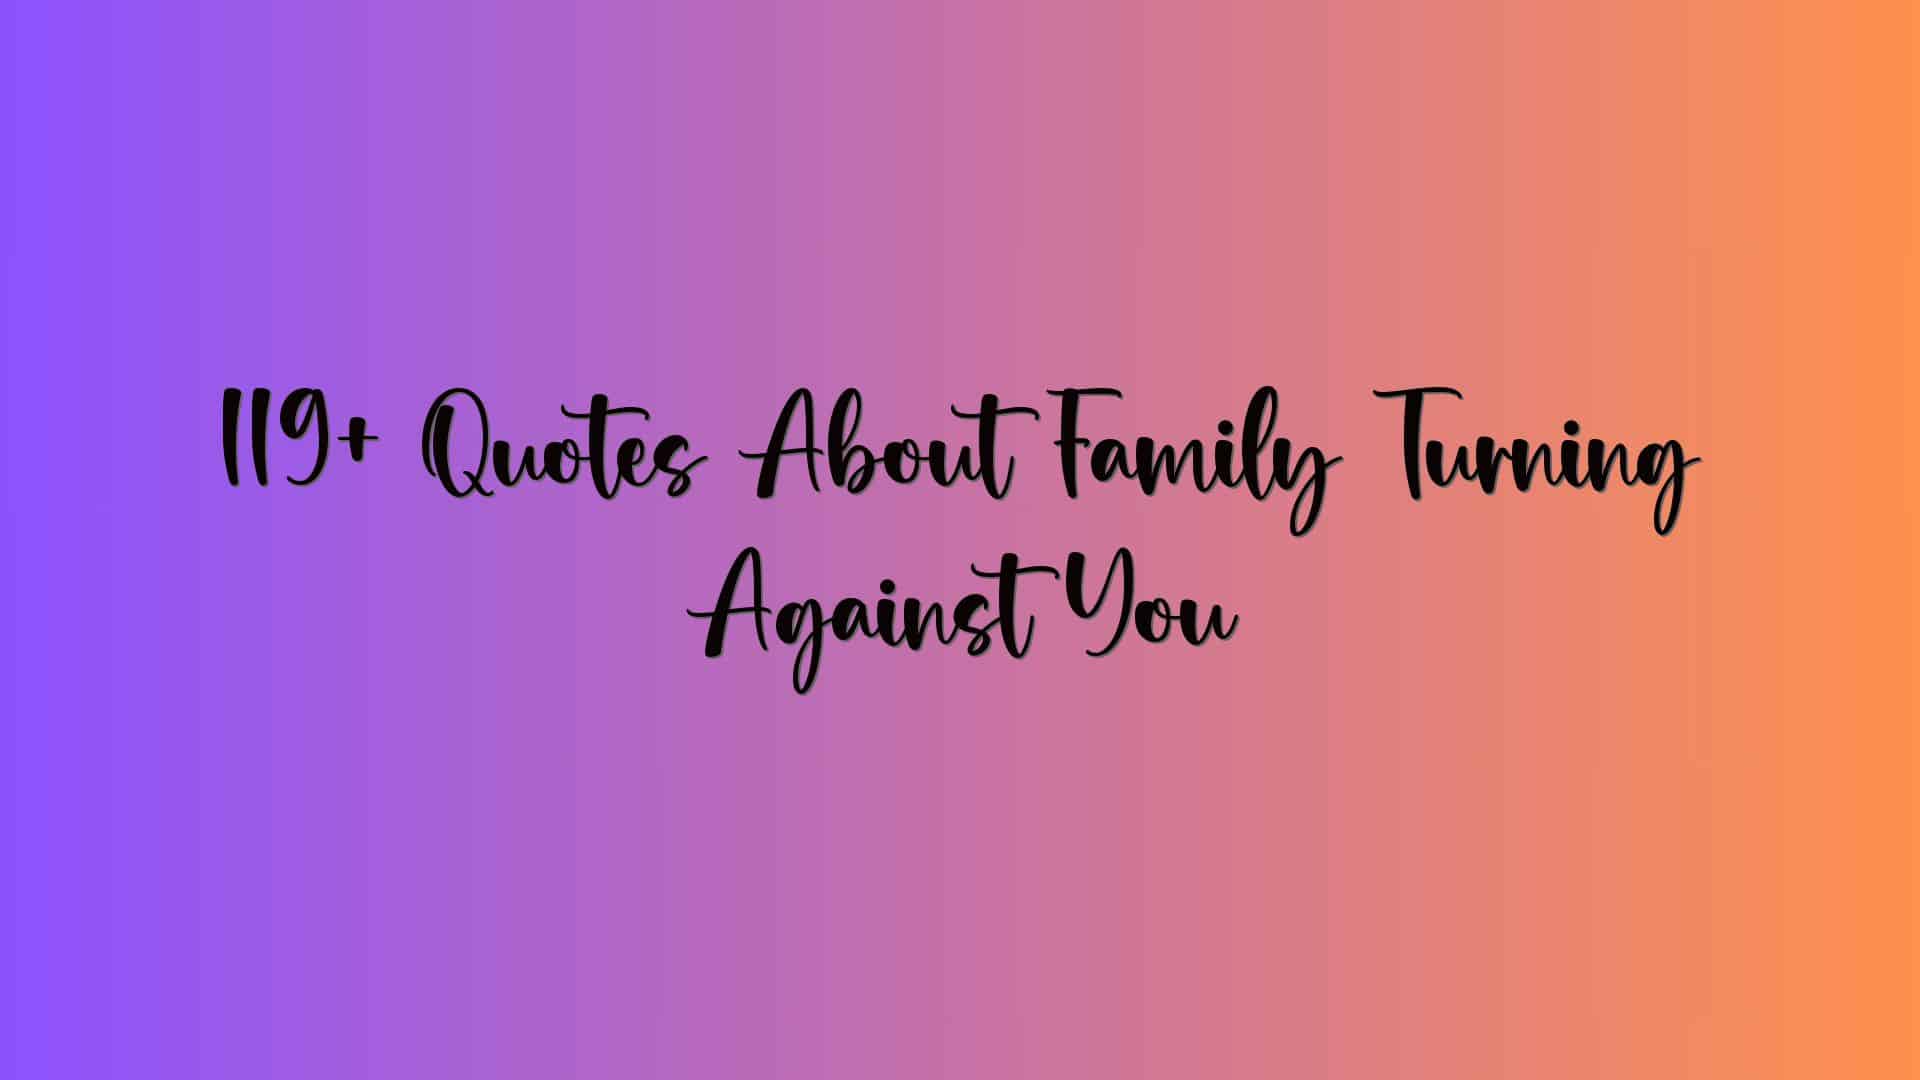 119+ Quotes About Family Turning Against You